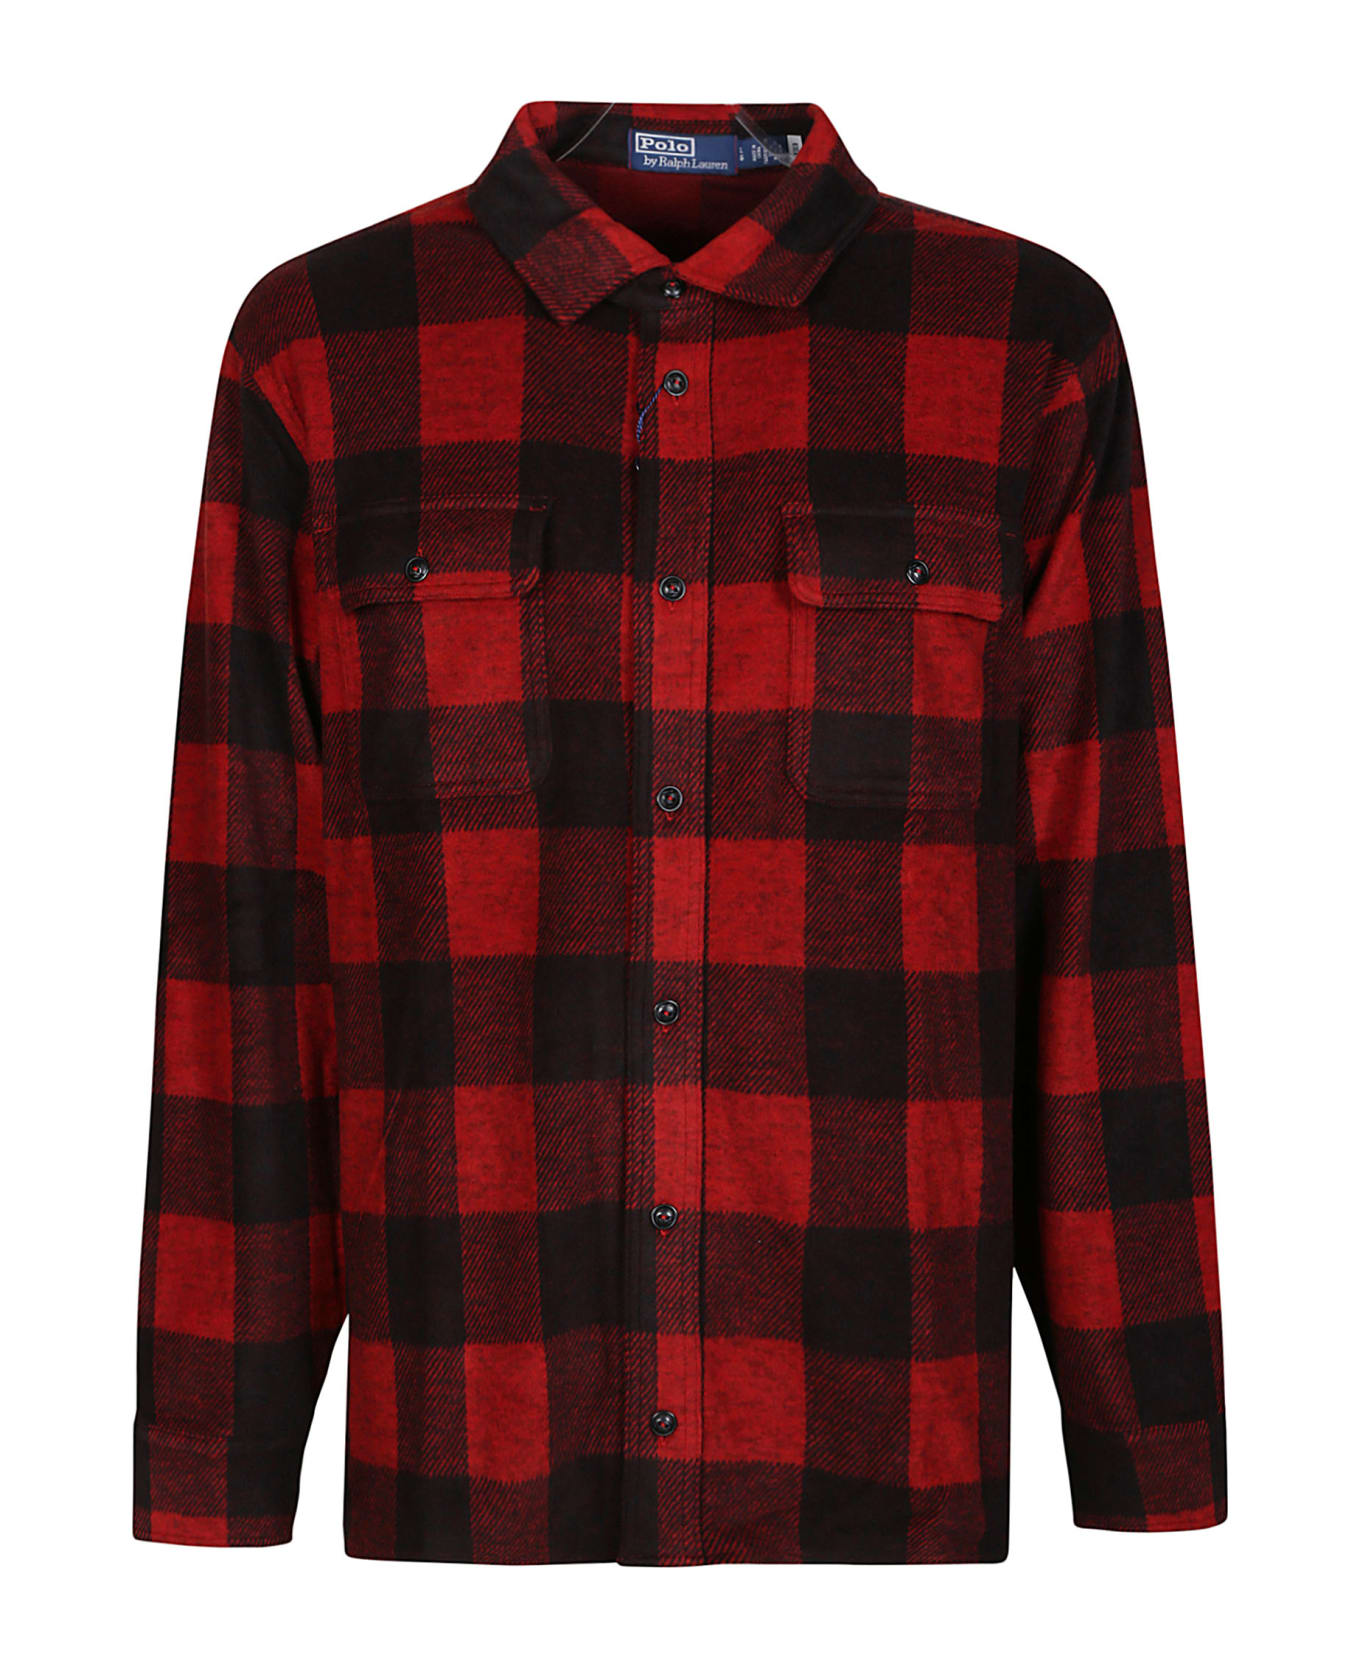 Polo Ralph Lauren Red Checked Shirt - Red